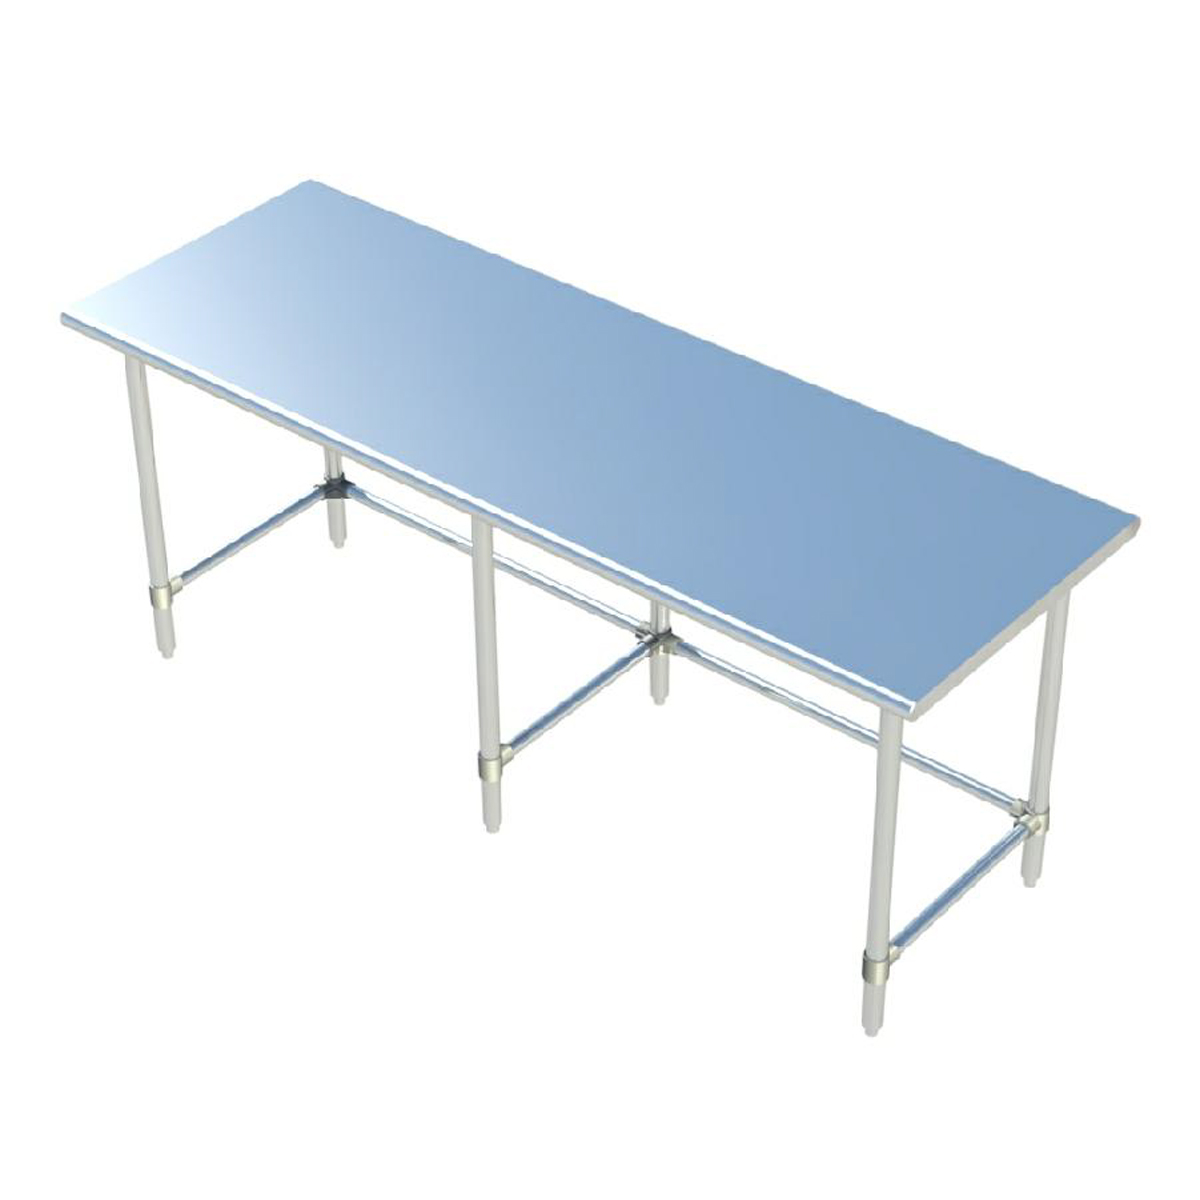 Sapphire SMTO-2484S Stainless Steel Top Work Table 84"W x 24"D